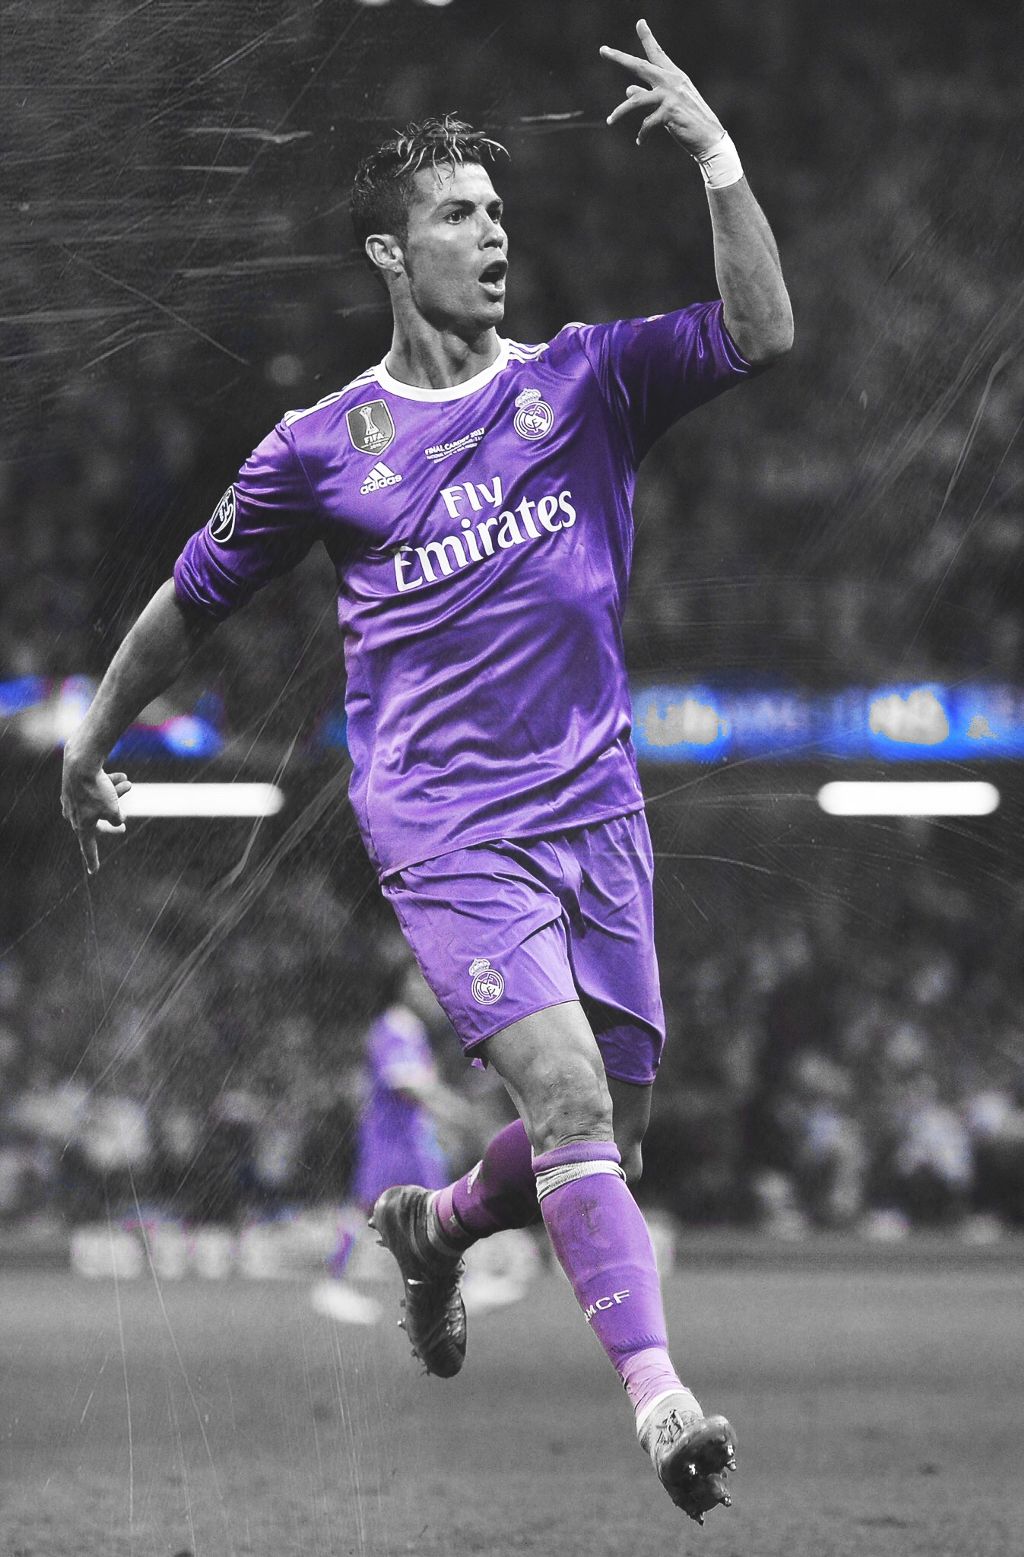 real madrid wallpaper,player,football player,purple,sports equipment,soccer player